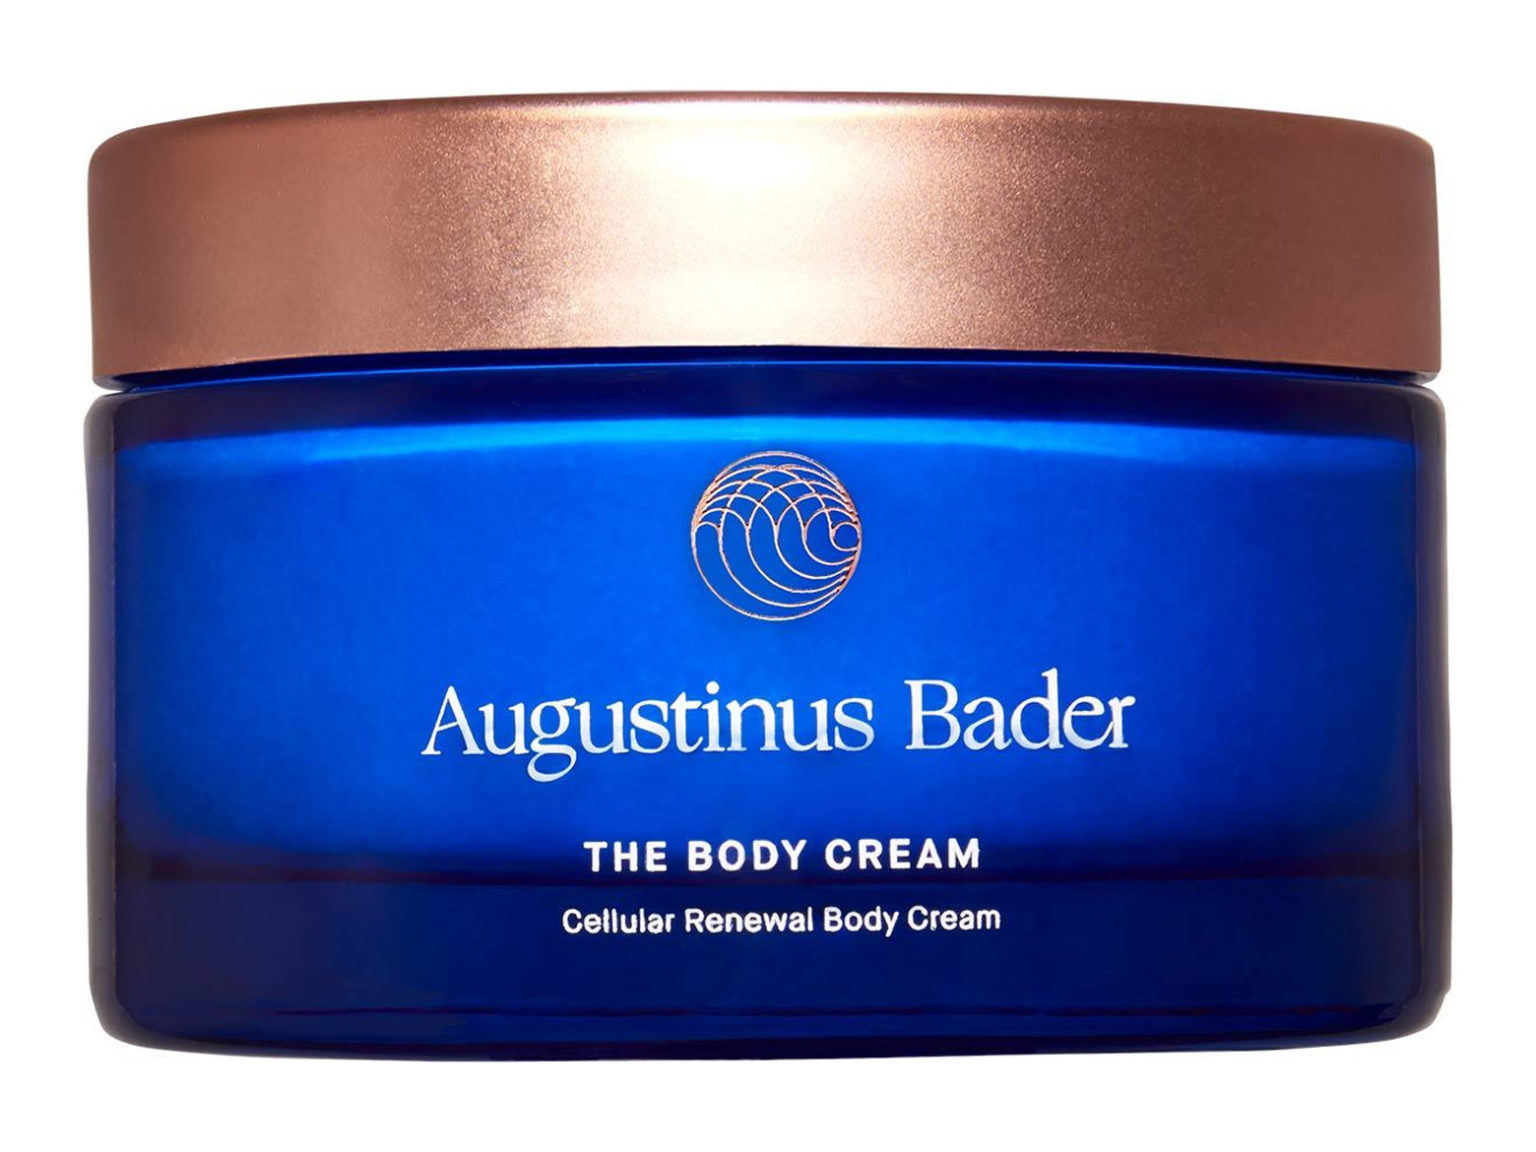 Best body firming cream for arms